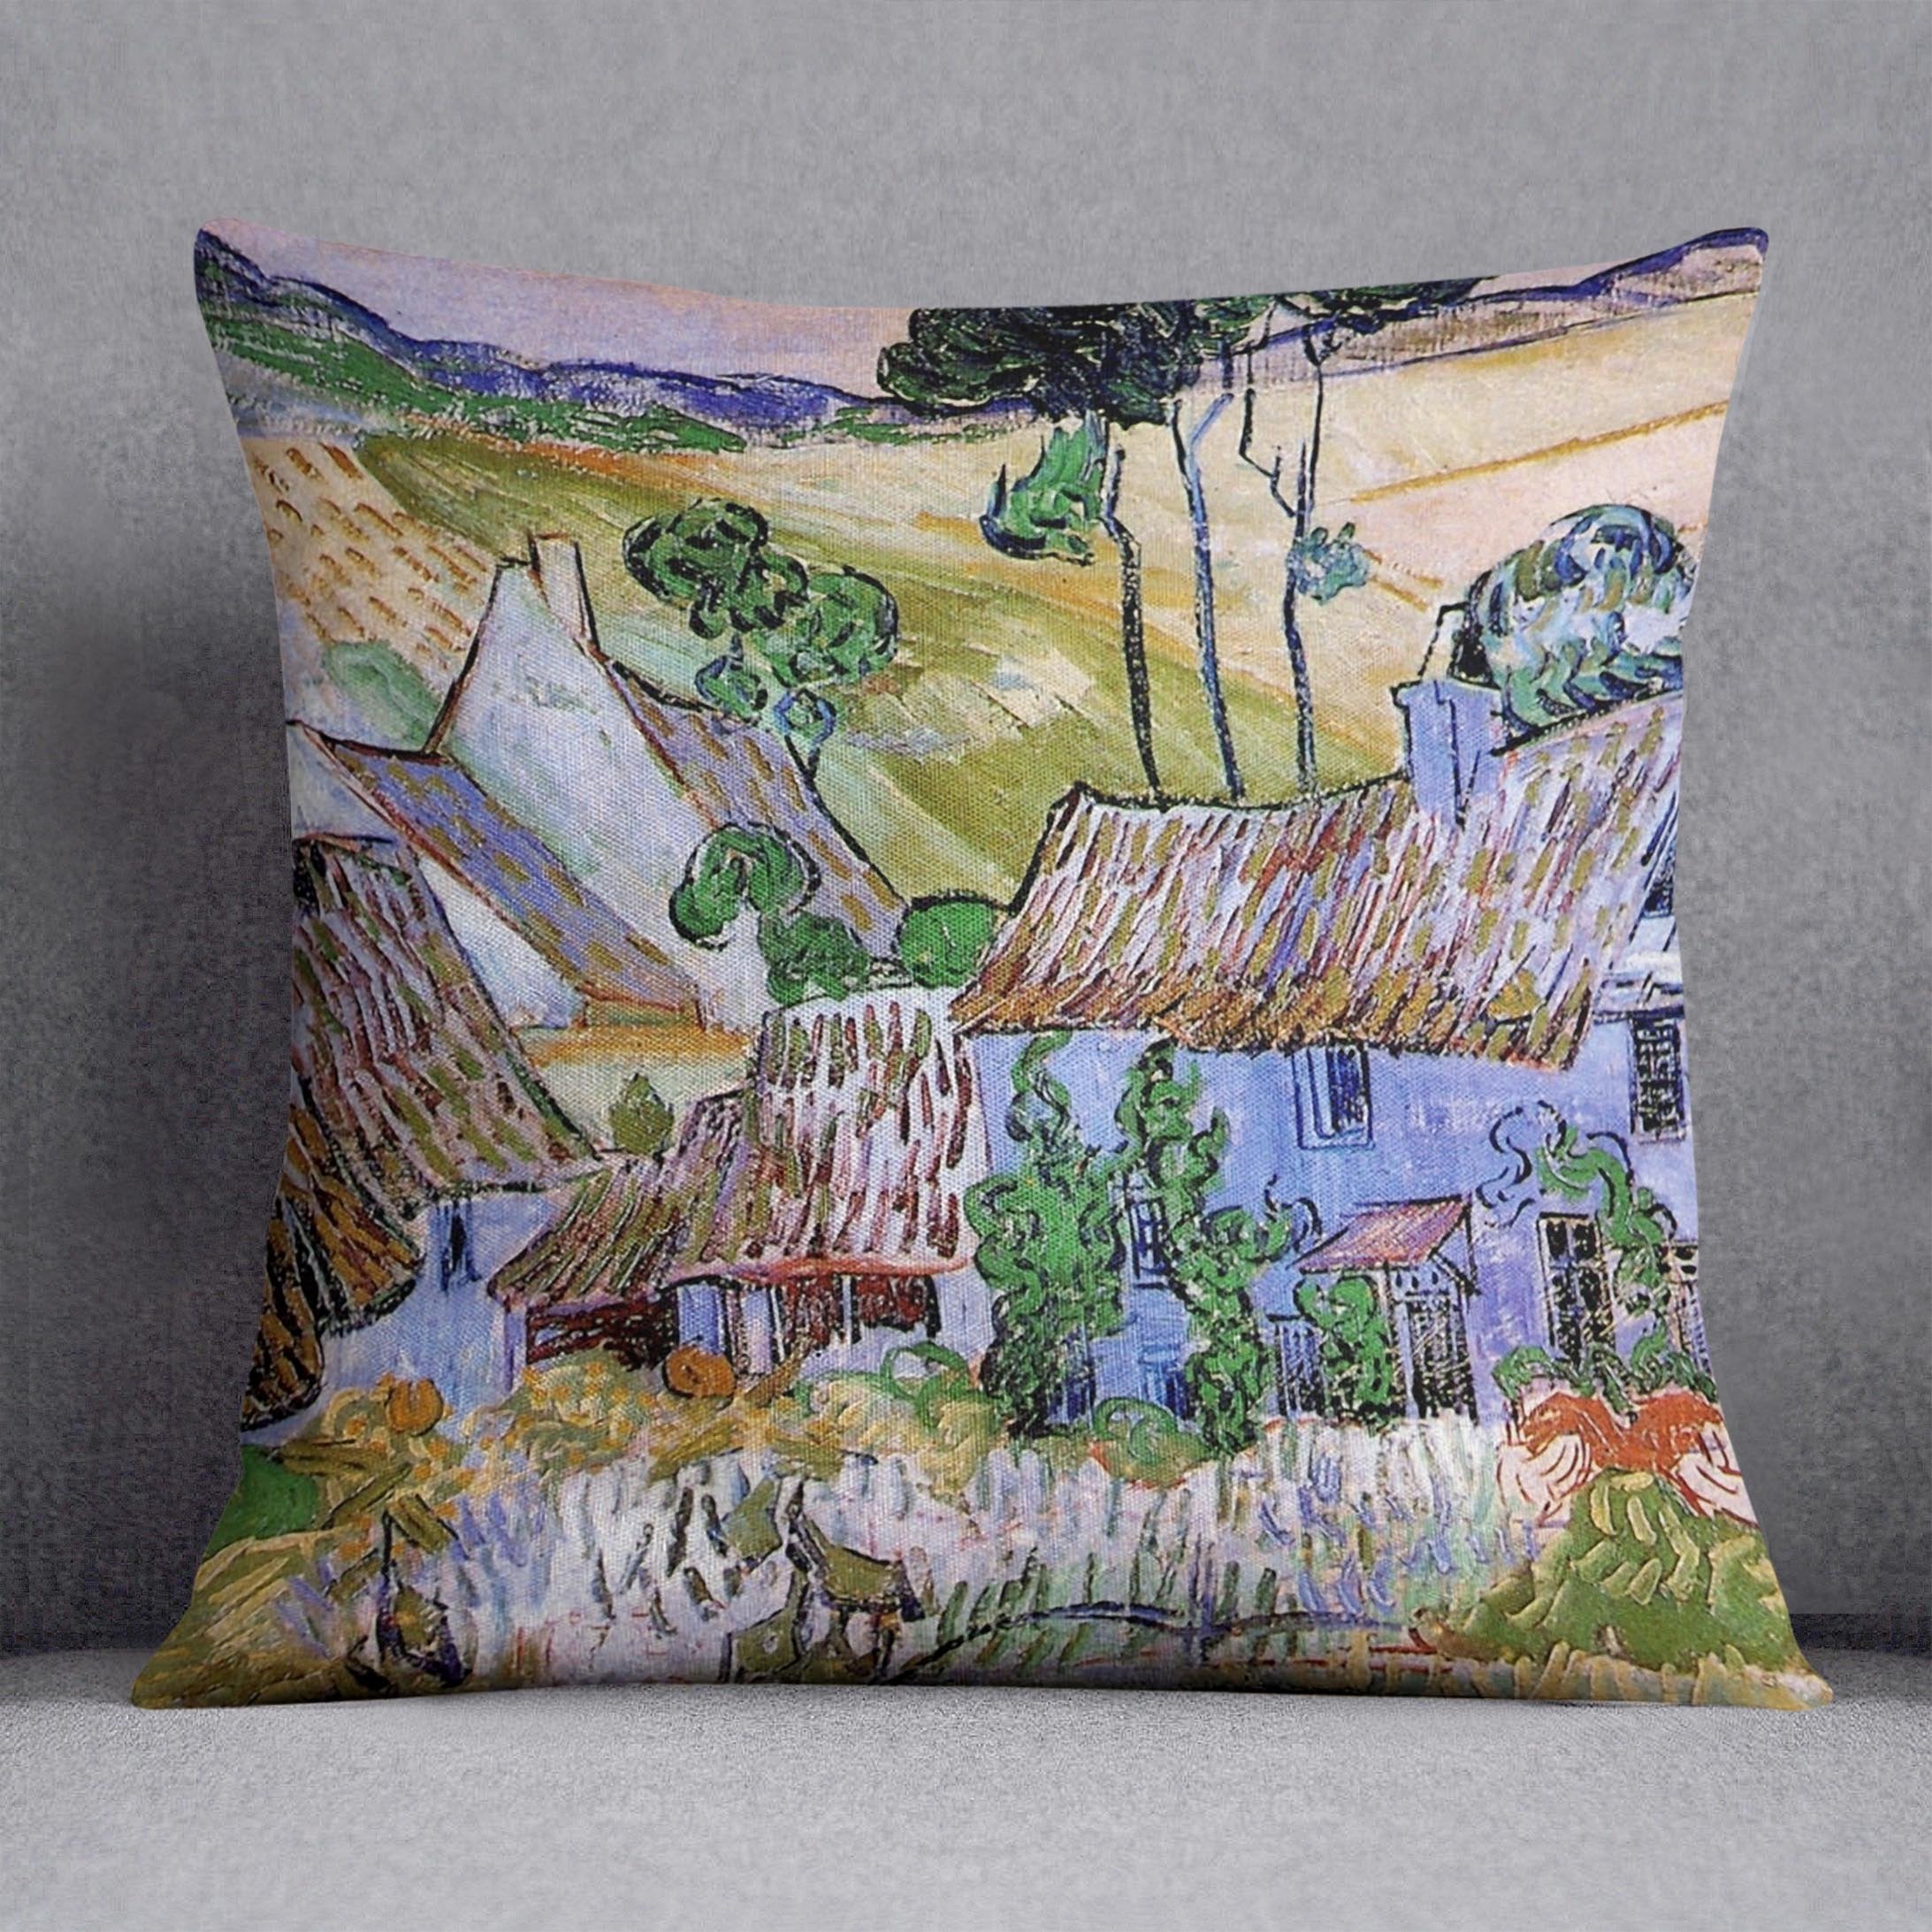 Thatched Cottages by a Hill by Van Gogh Throw Pillow